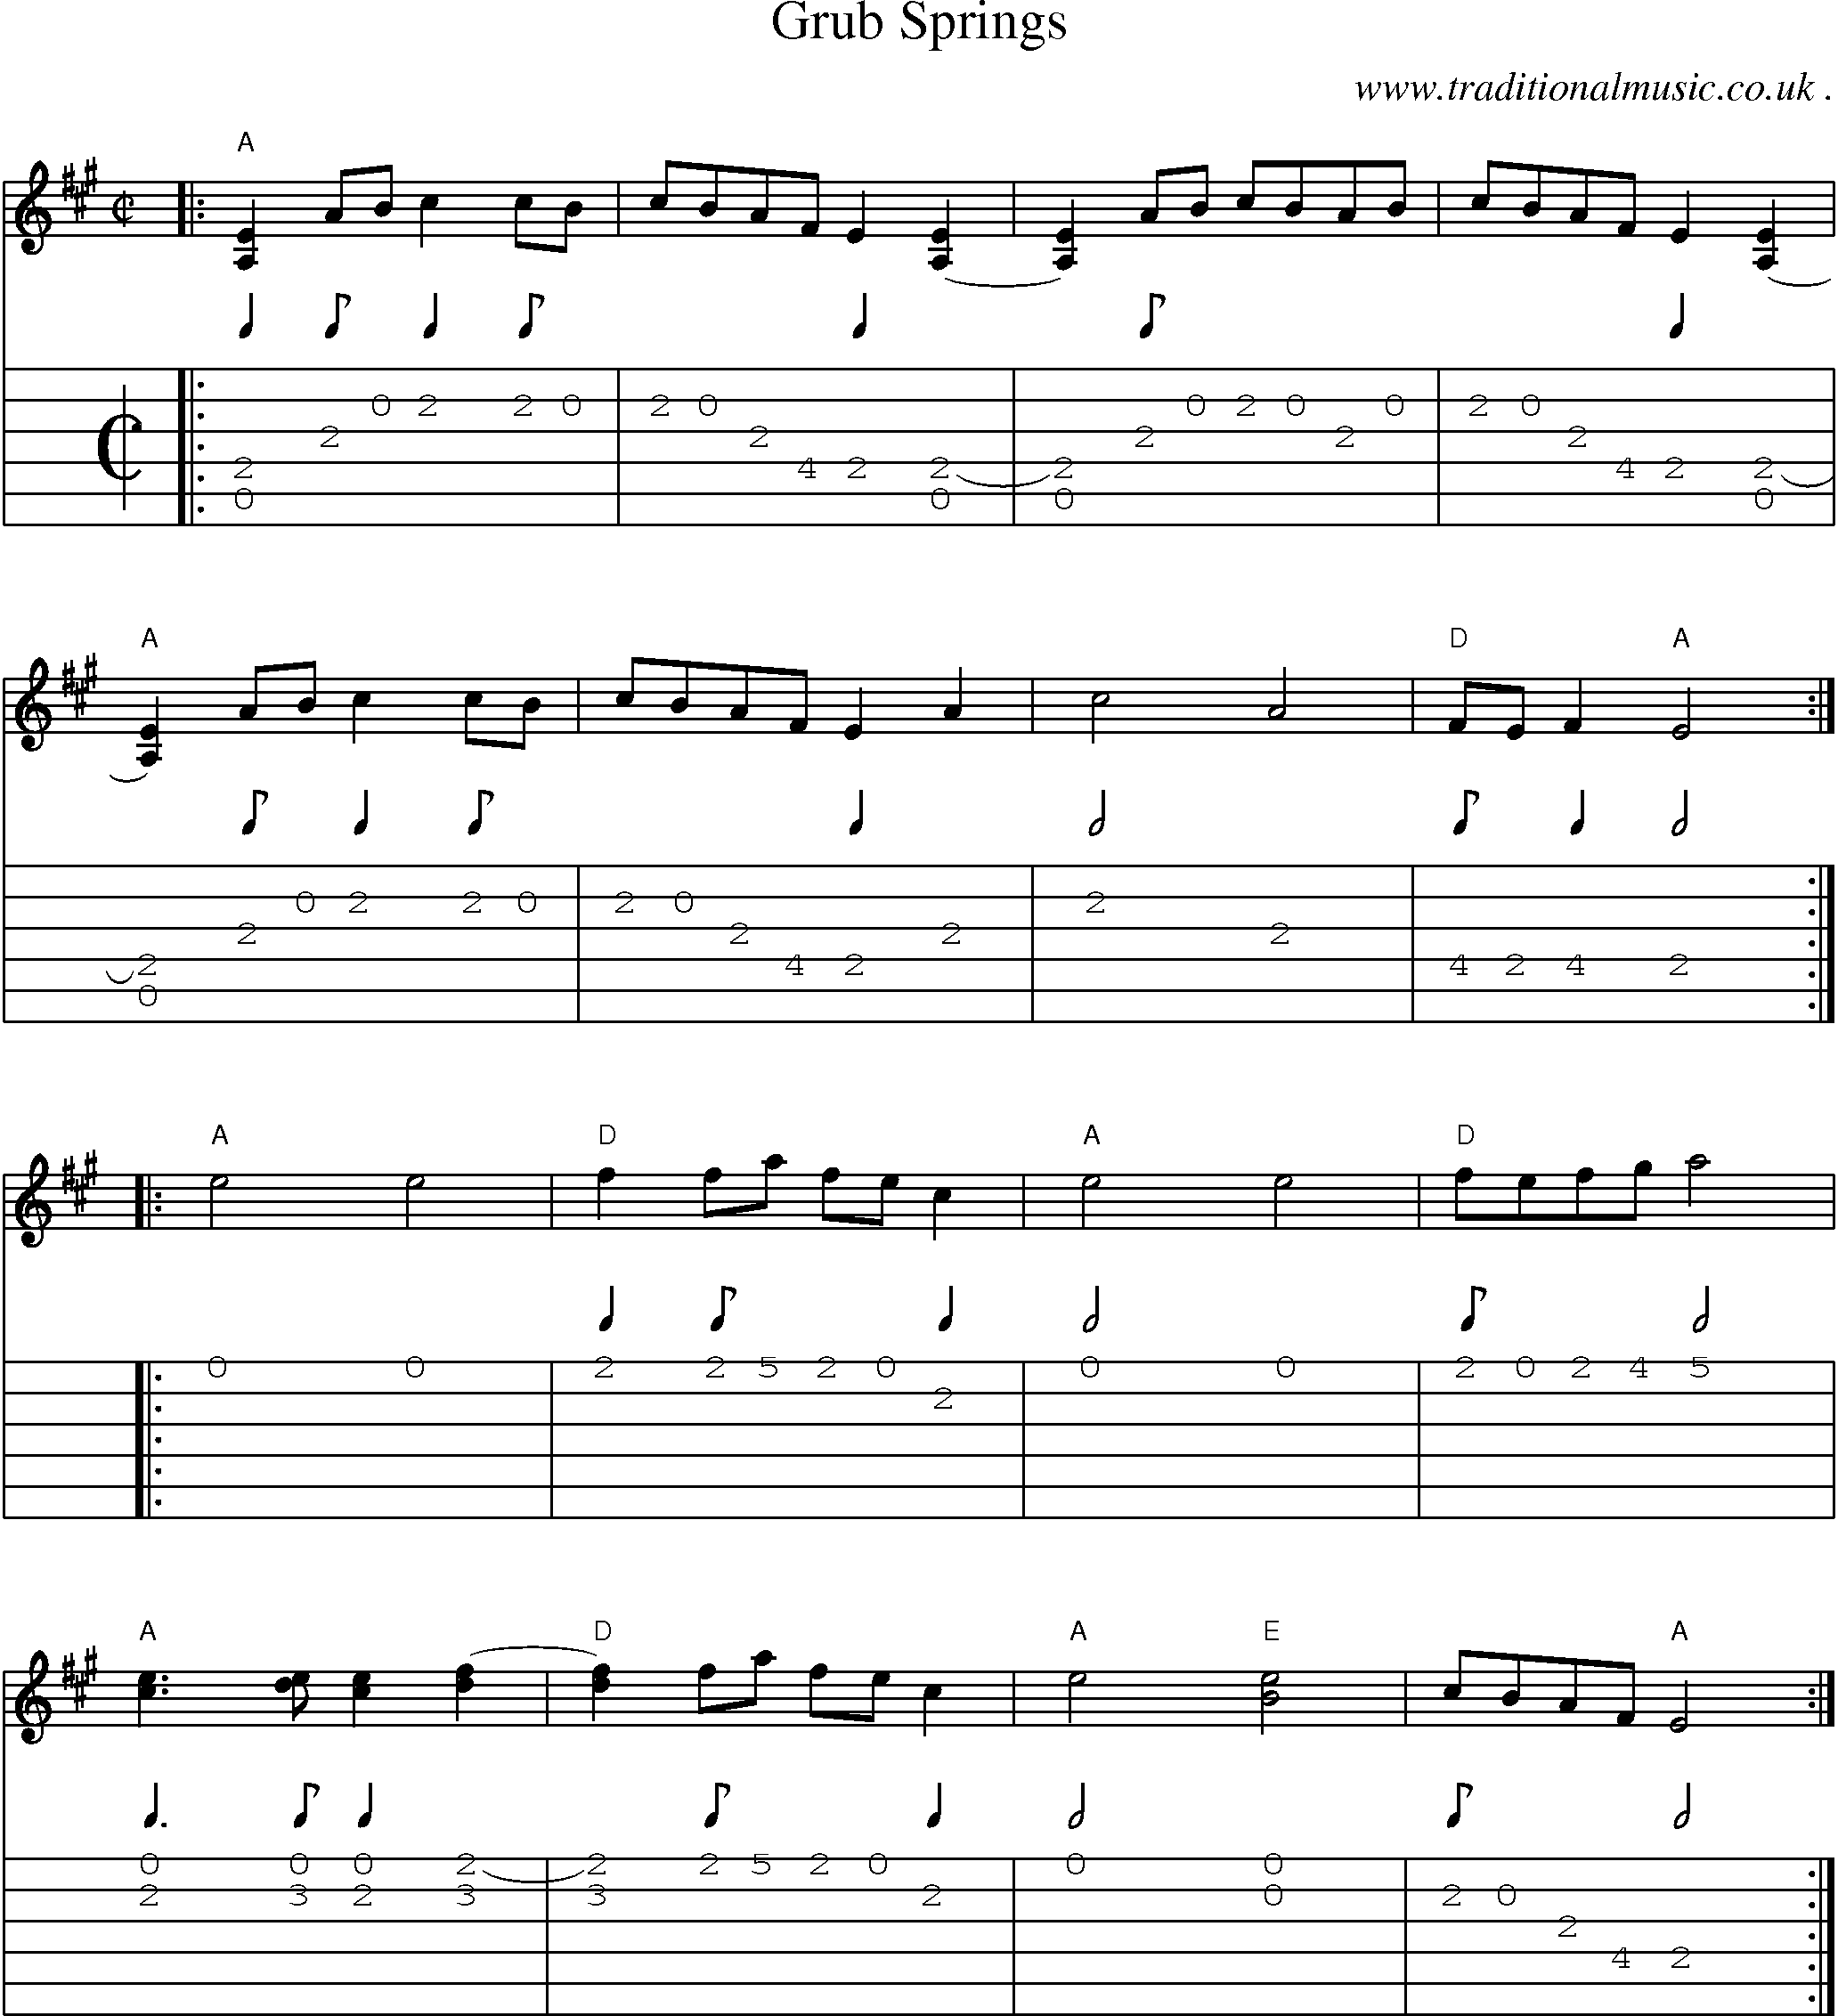 Music Score and Guitar Tabs for Grub Springs